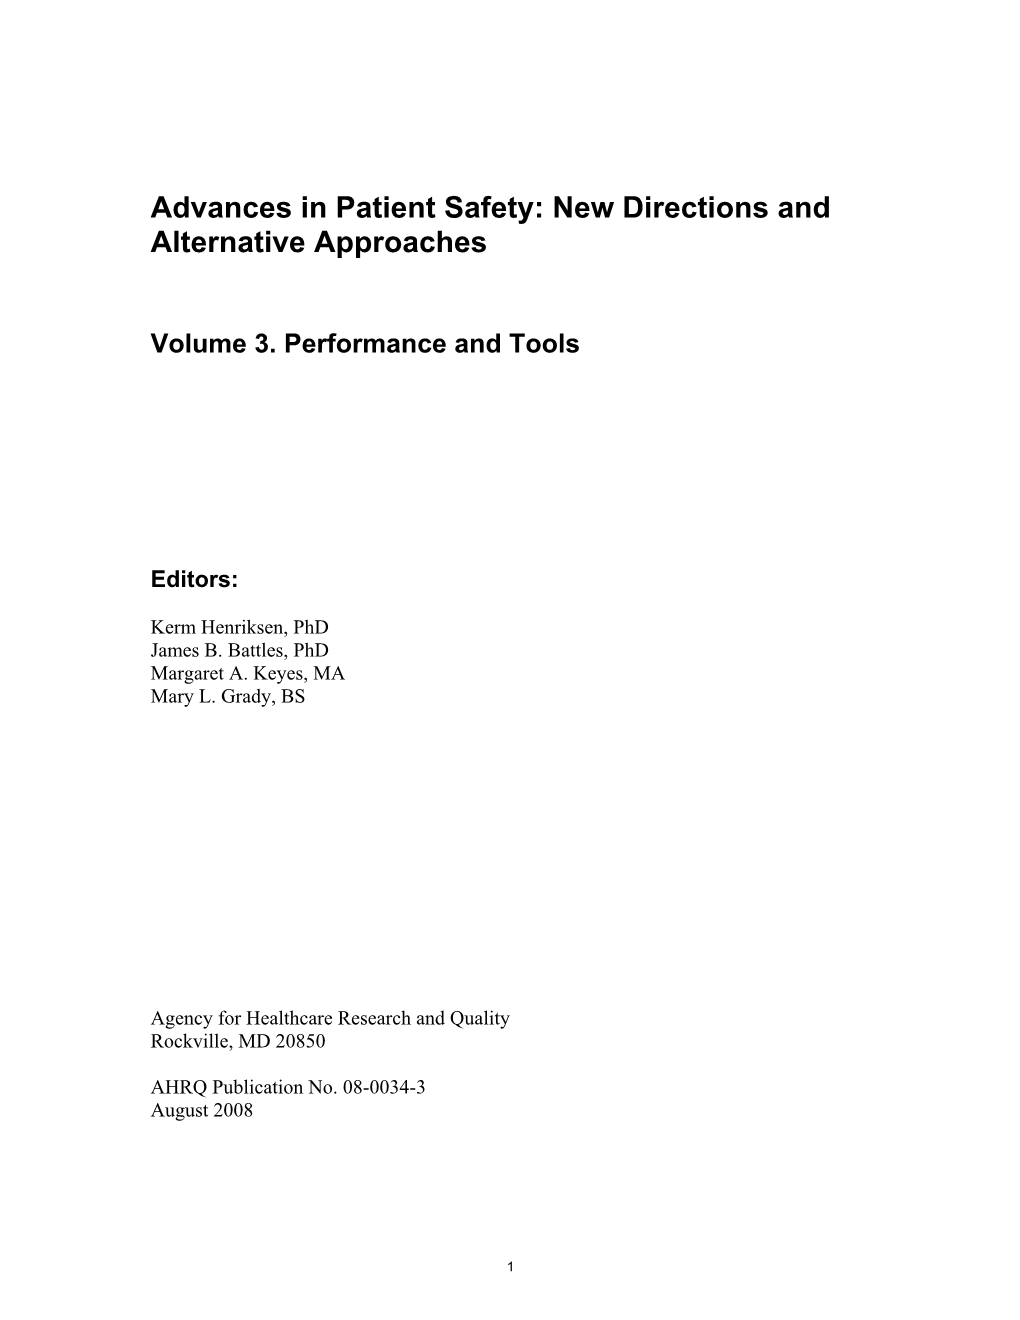 Advances in Patient Safety: New Directions and Alternative Approaches